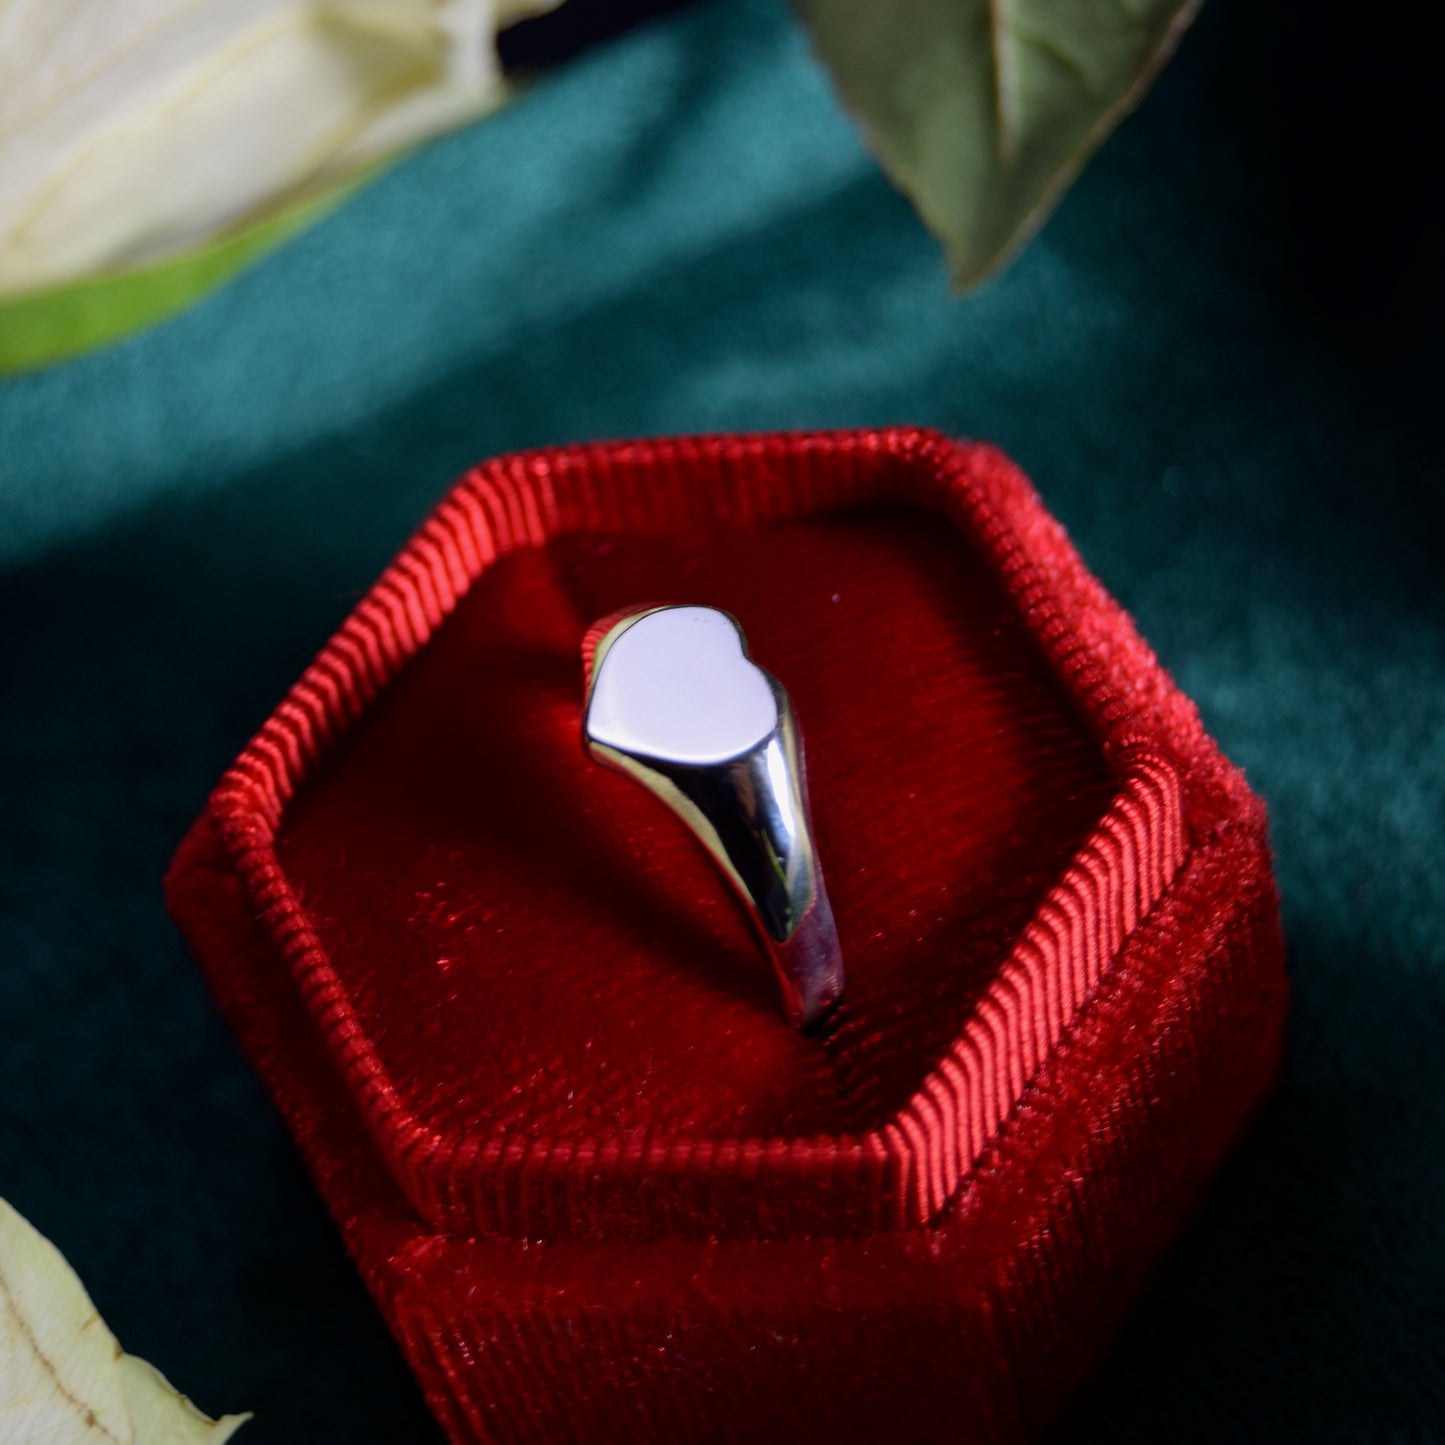 Heart Signet Ring in Silver